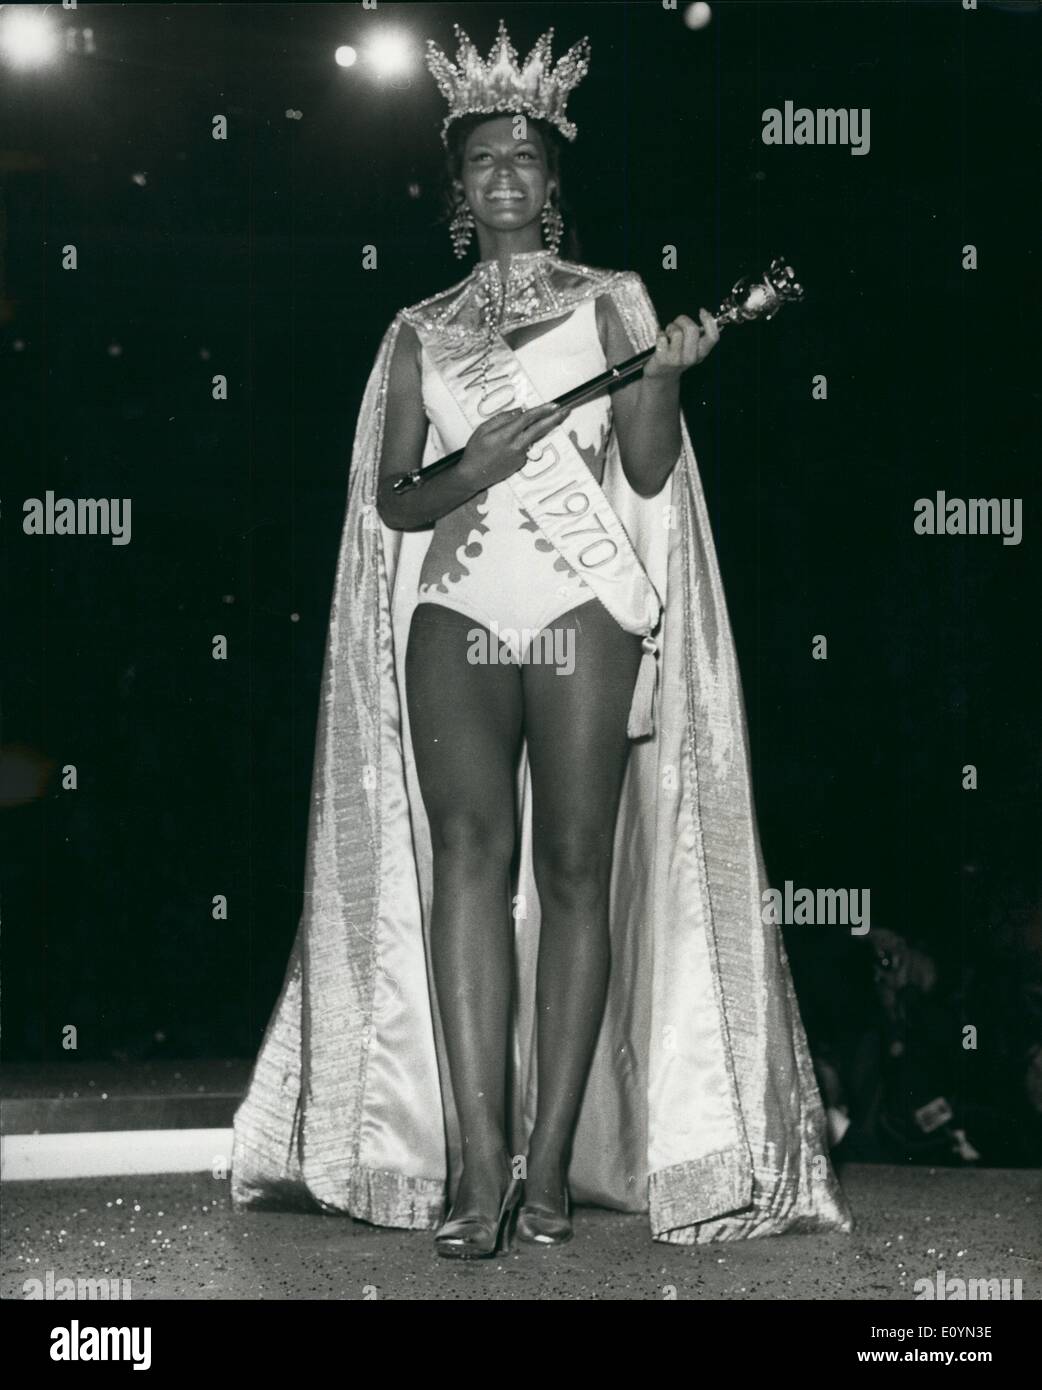 Nov. 11, 1970 - Miss Grenada is Miss World 1970: 22 year old Miss Jennifer Hosten (Miss Grenda) was crowned Miss World 1970 at the Royal Albert Hall in London this evening, 2nd was Miss Africa South, 20 year old Pearl Jensen and 3rd Miss Israel, 18 year old Irith Lavi. Photo shows 22 year-old Jennifer Hosten, (Miss Grenada) seen after she had won the title of Miss World 1970, in the Royal Albert Hall in London this evening. Stock Photo